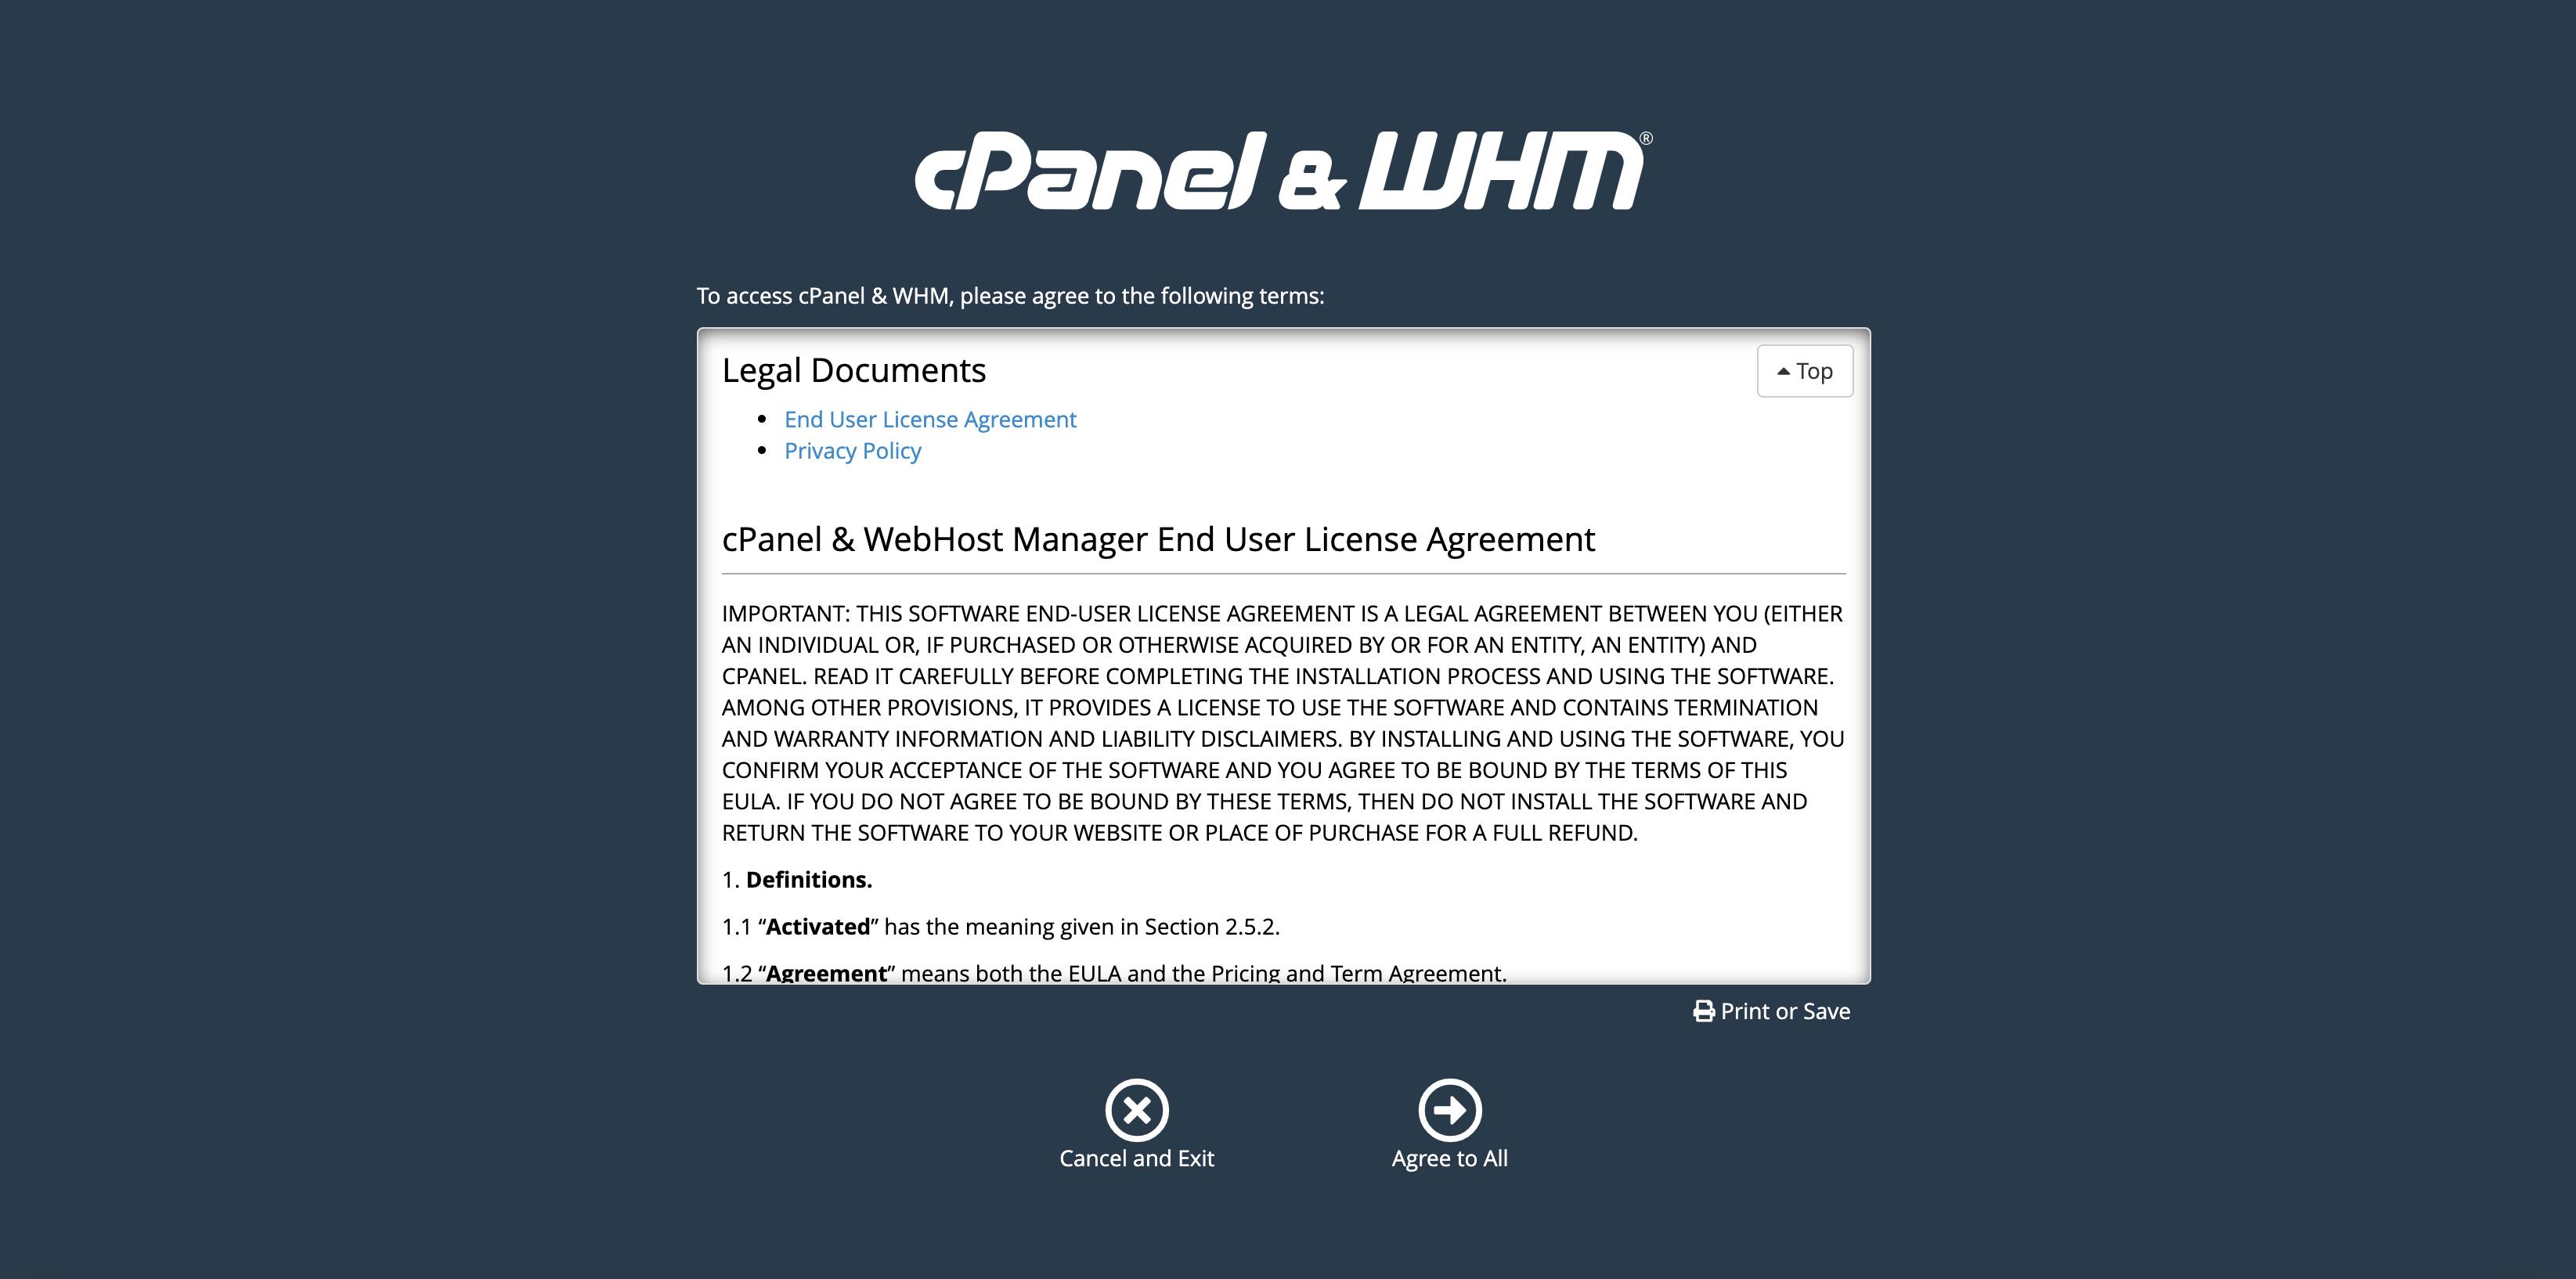 Agree to cPanel and WHM&rsquo;s terms